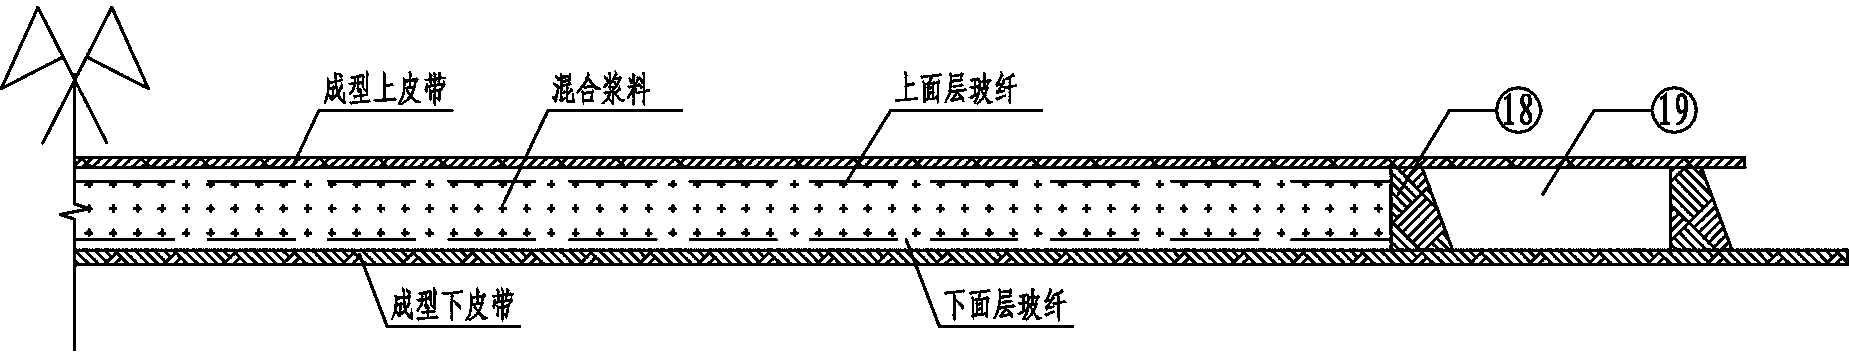 Production line and method for manufacturing building decorative sheet